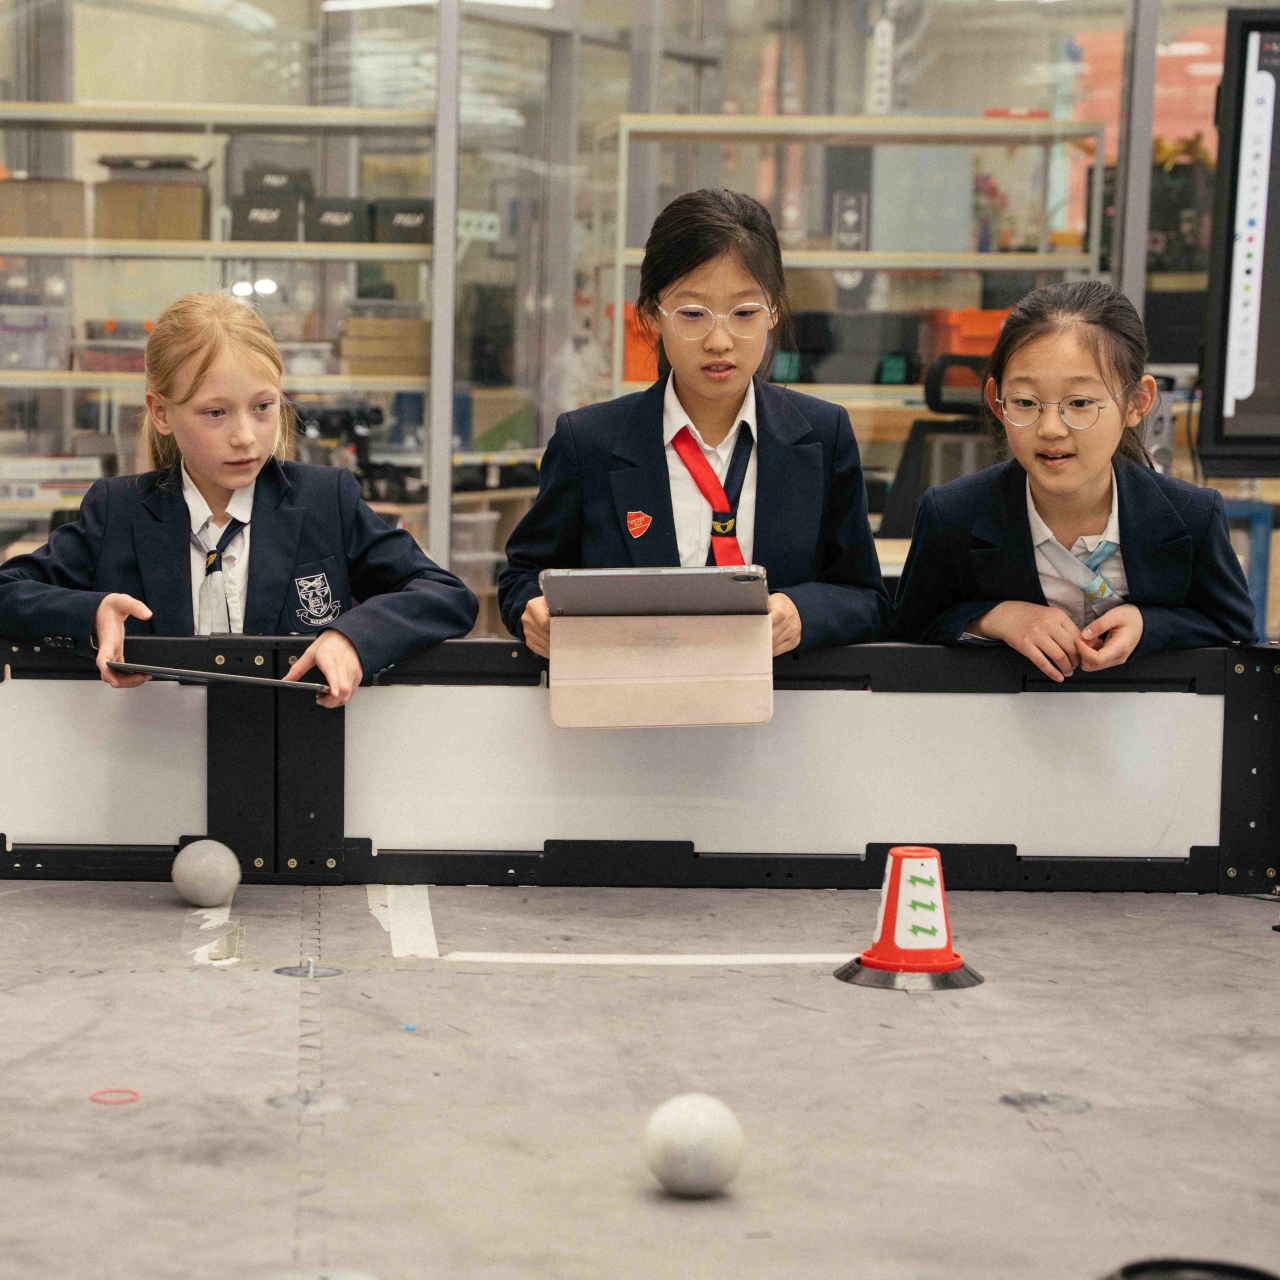 Students Showcase Creativity and Coding Skills with the Sphero BOLT Coding Robot Kit